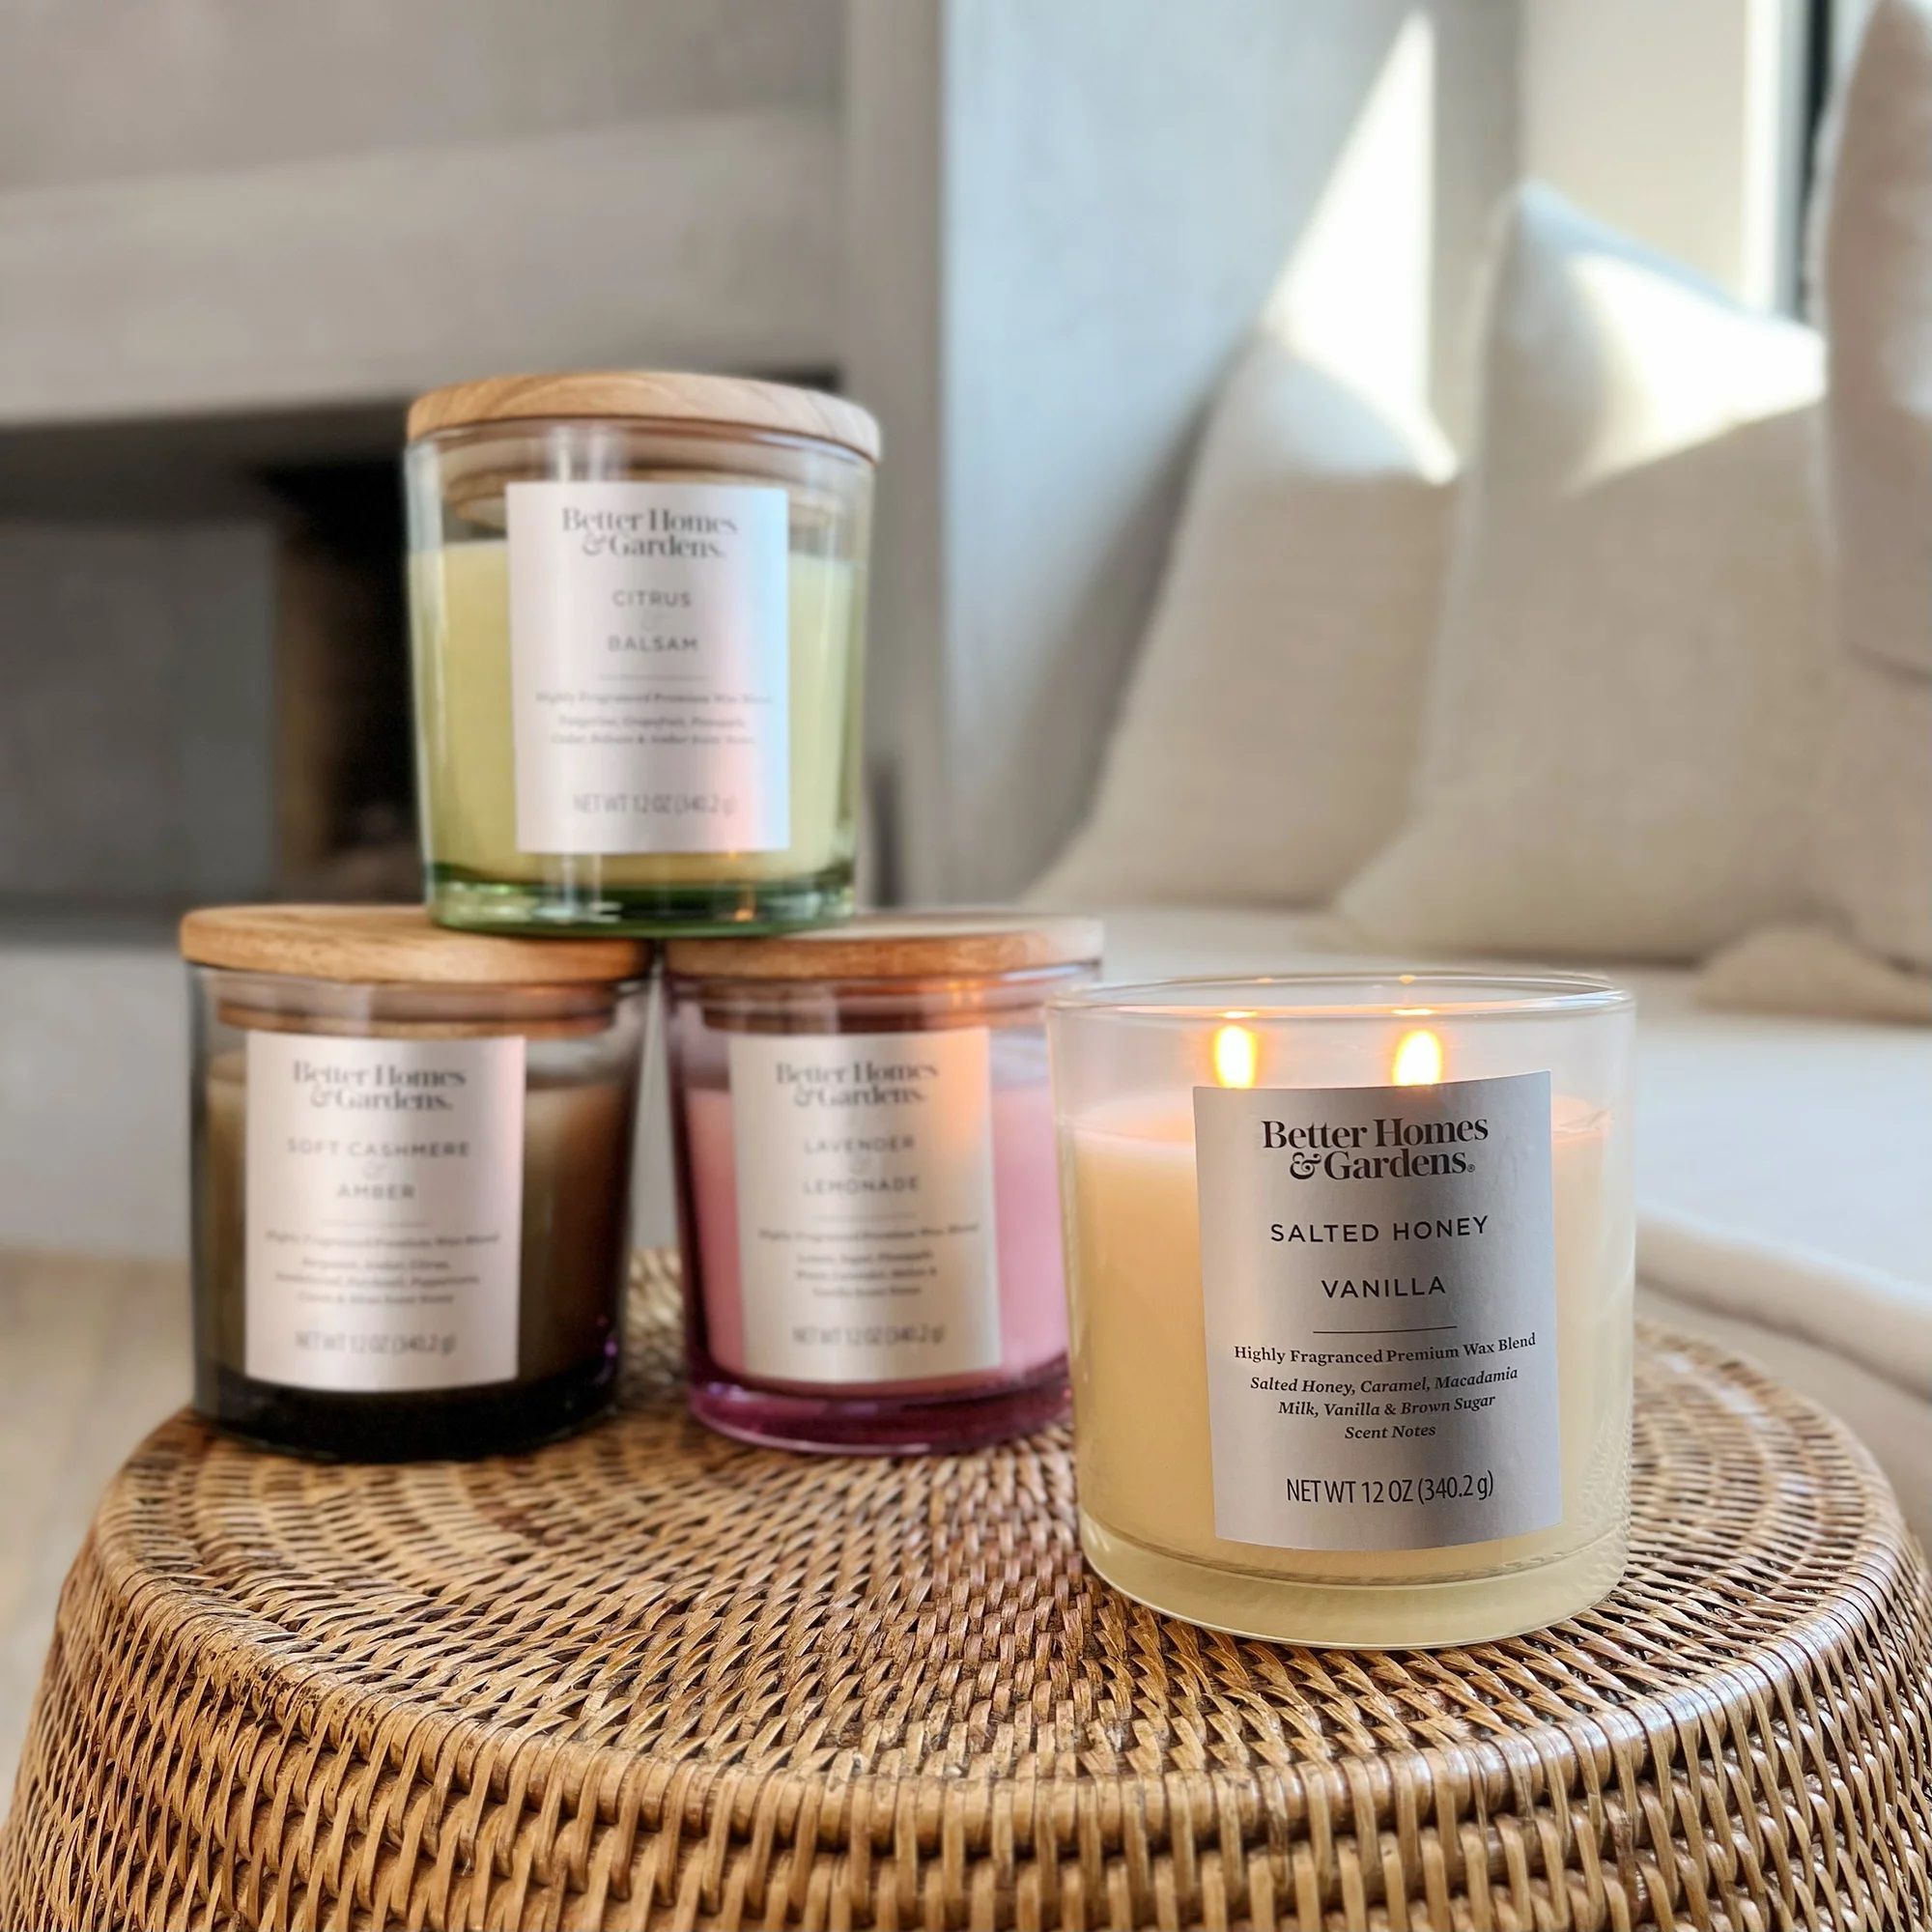 better homes and gardens candles